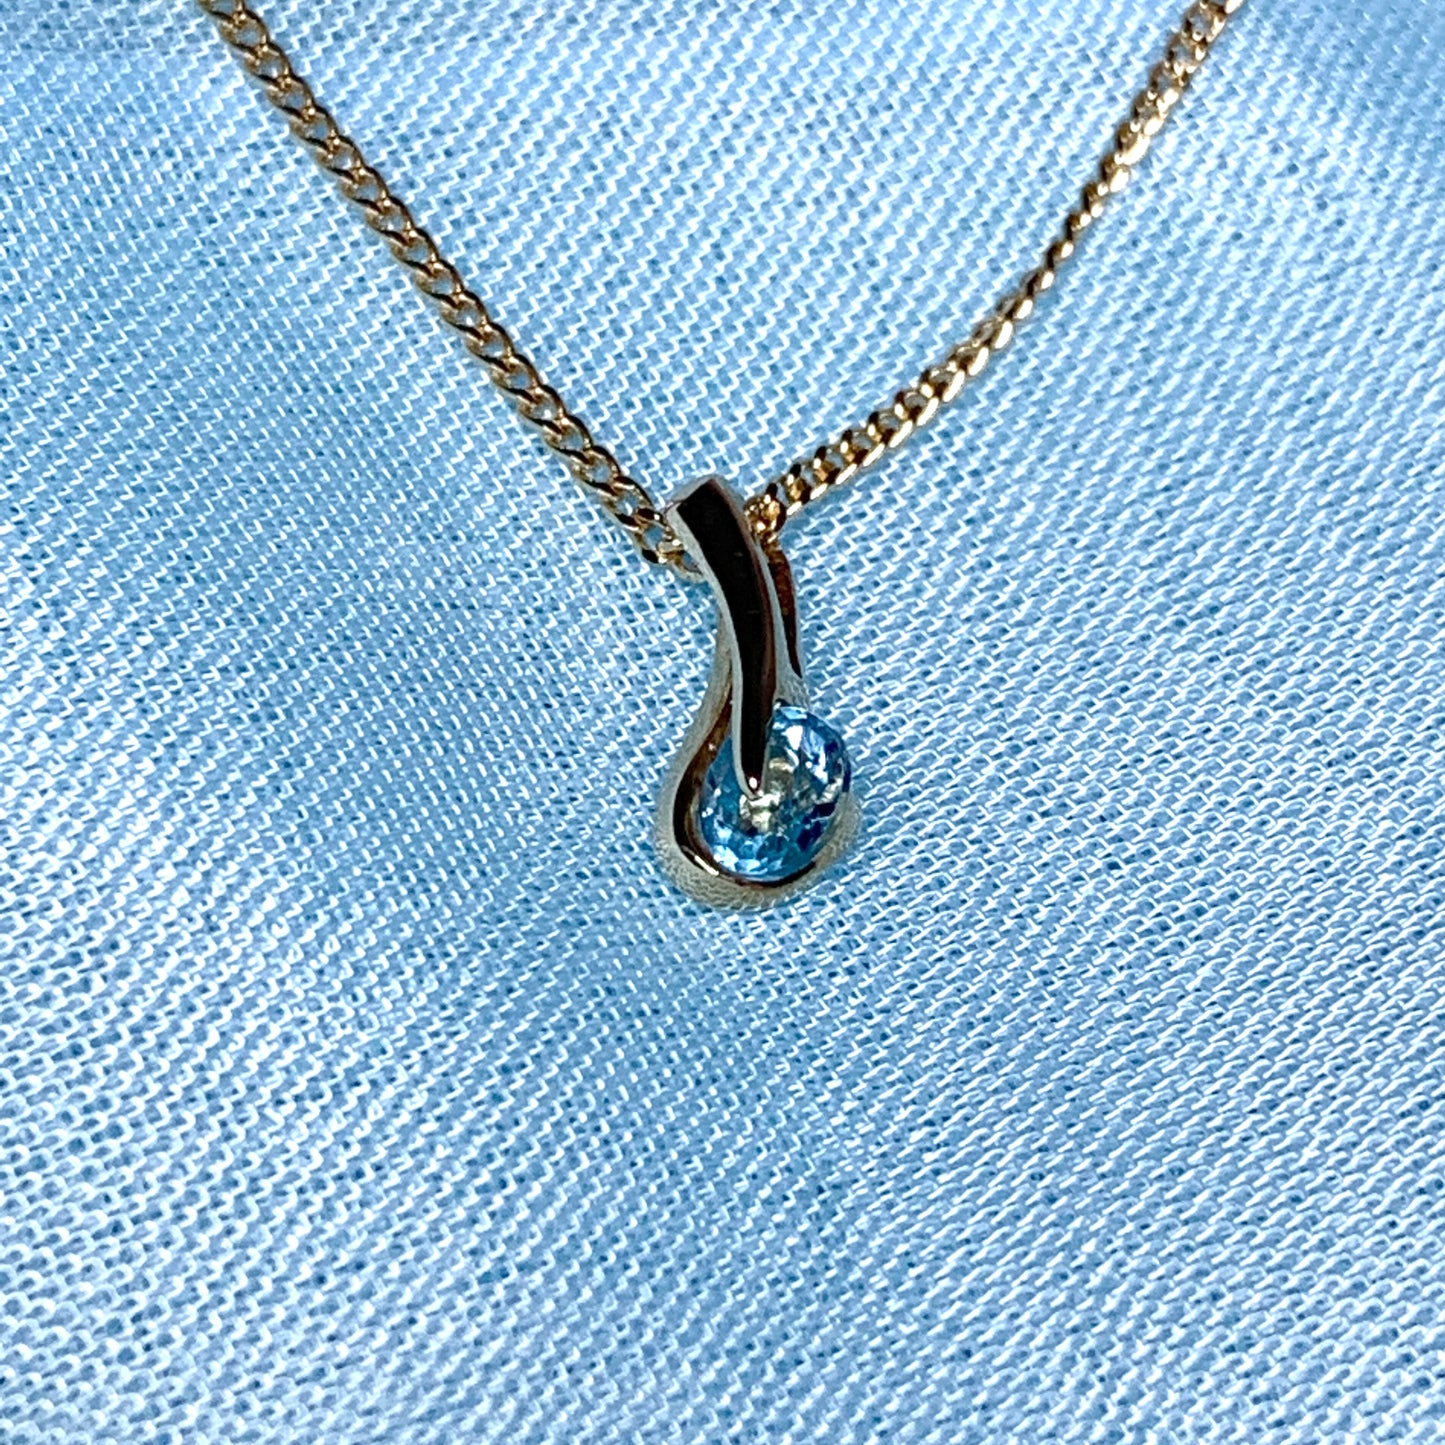 Yellow gold blue topaz necklace pendent